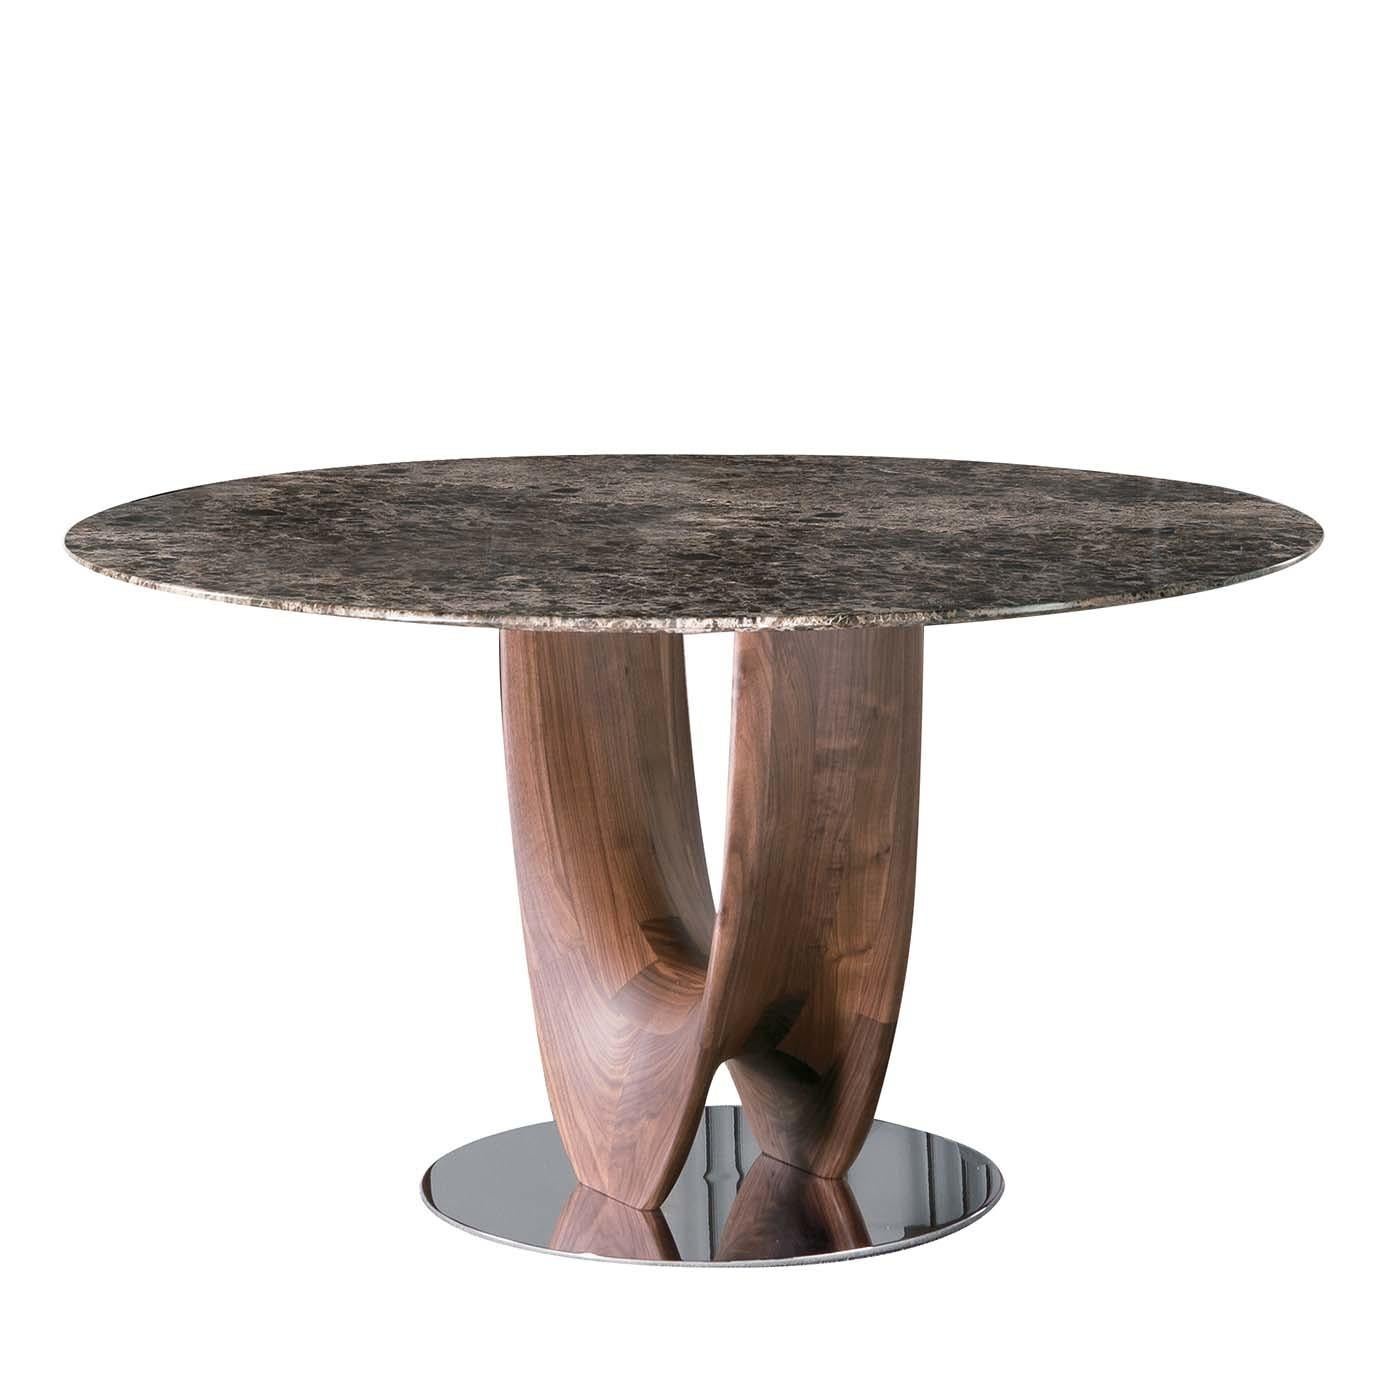 Italian Axis Round Small Table with Marble Top by Stefano Bigi by Pacini For Sale